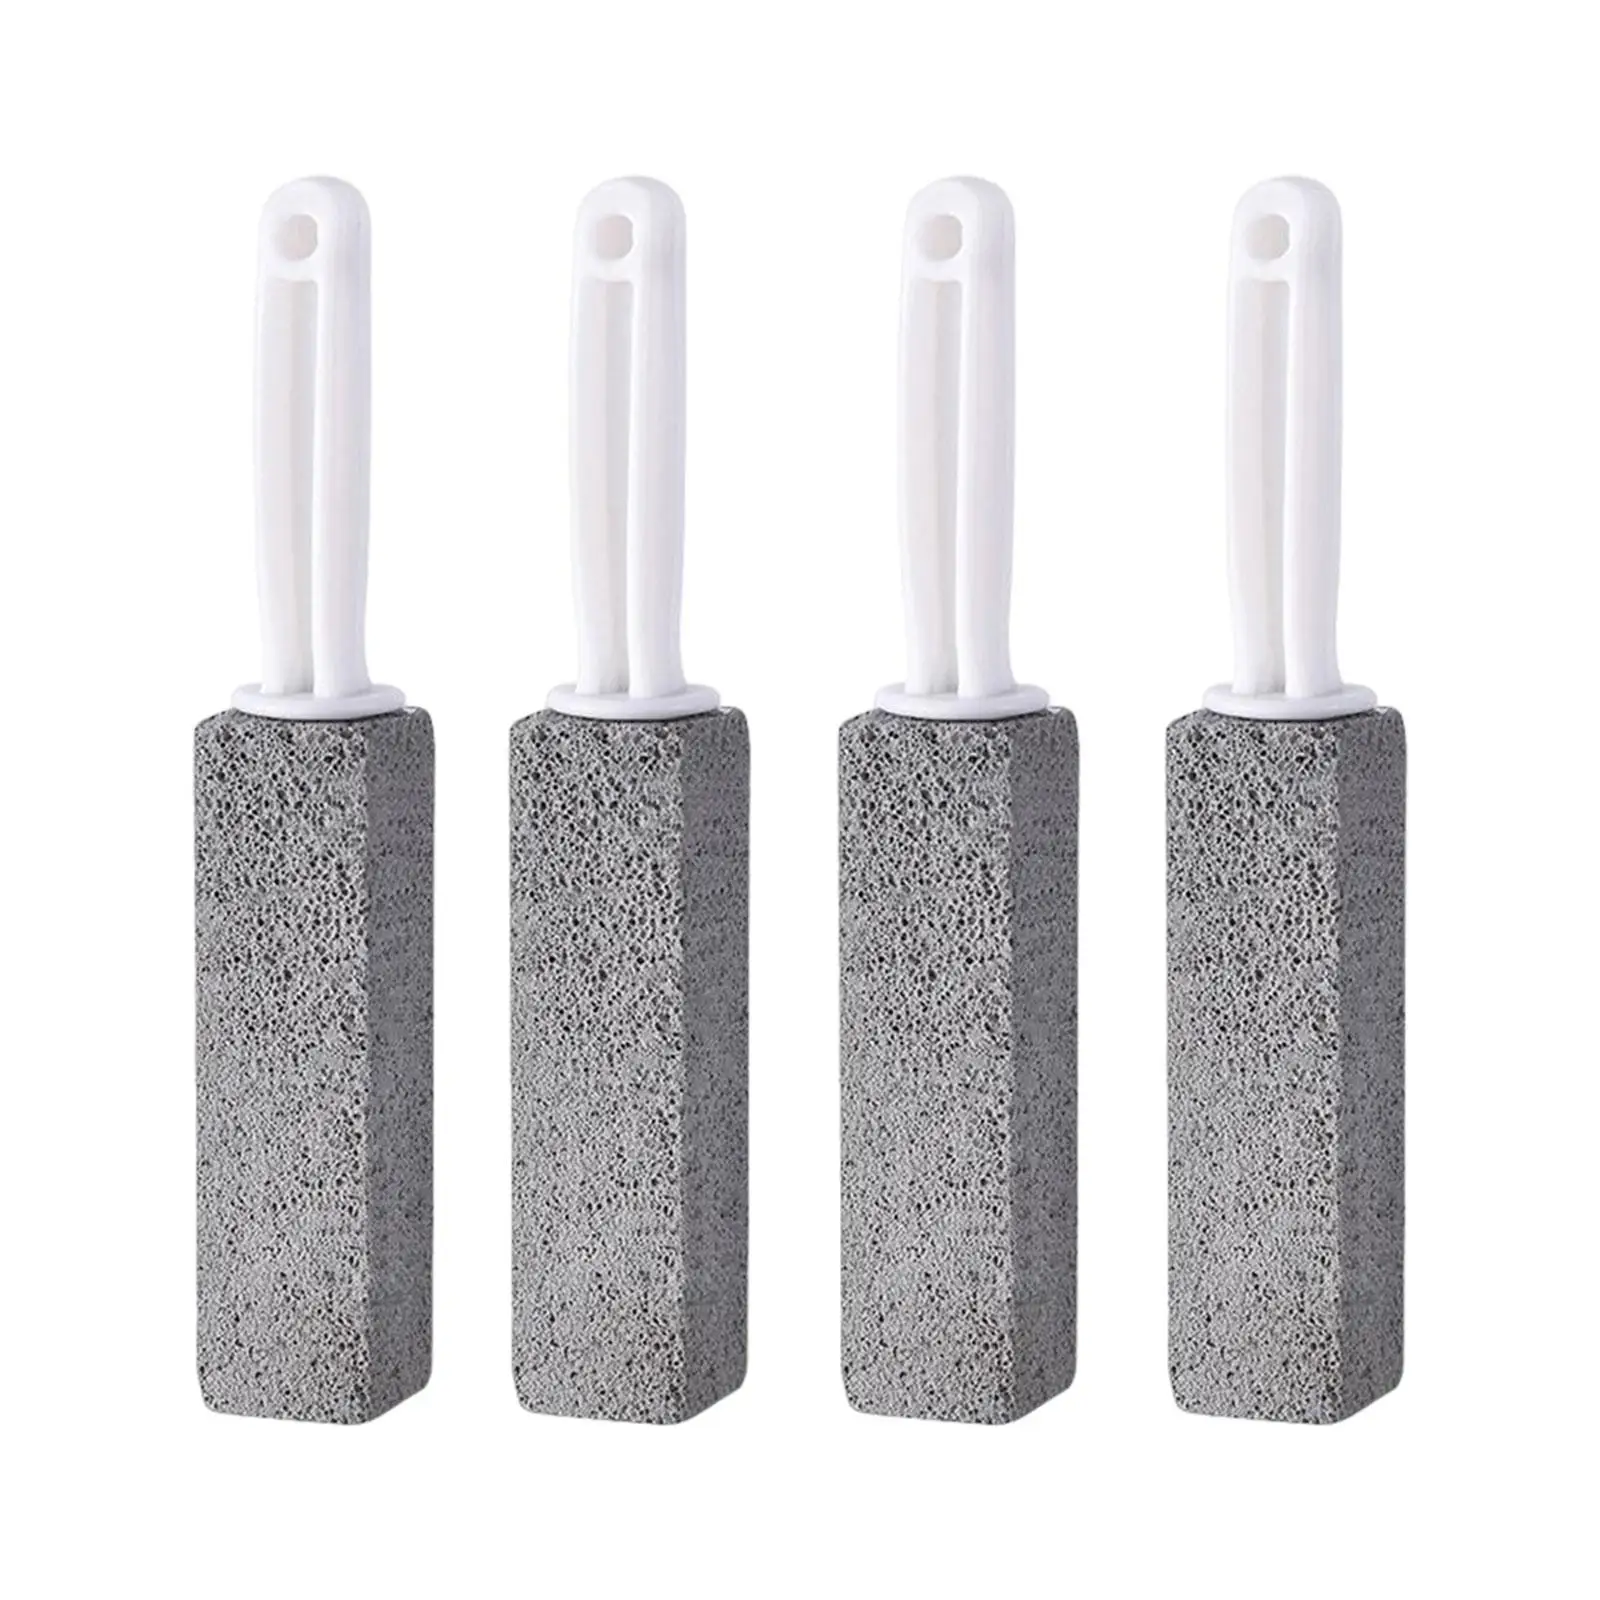 Practical Toilet Brush with Handle Toilet Bowl Cleaner for Toilet Bowl Tiles